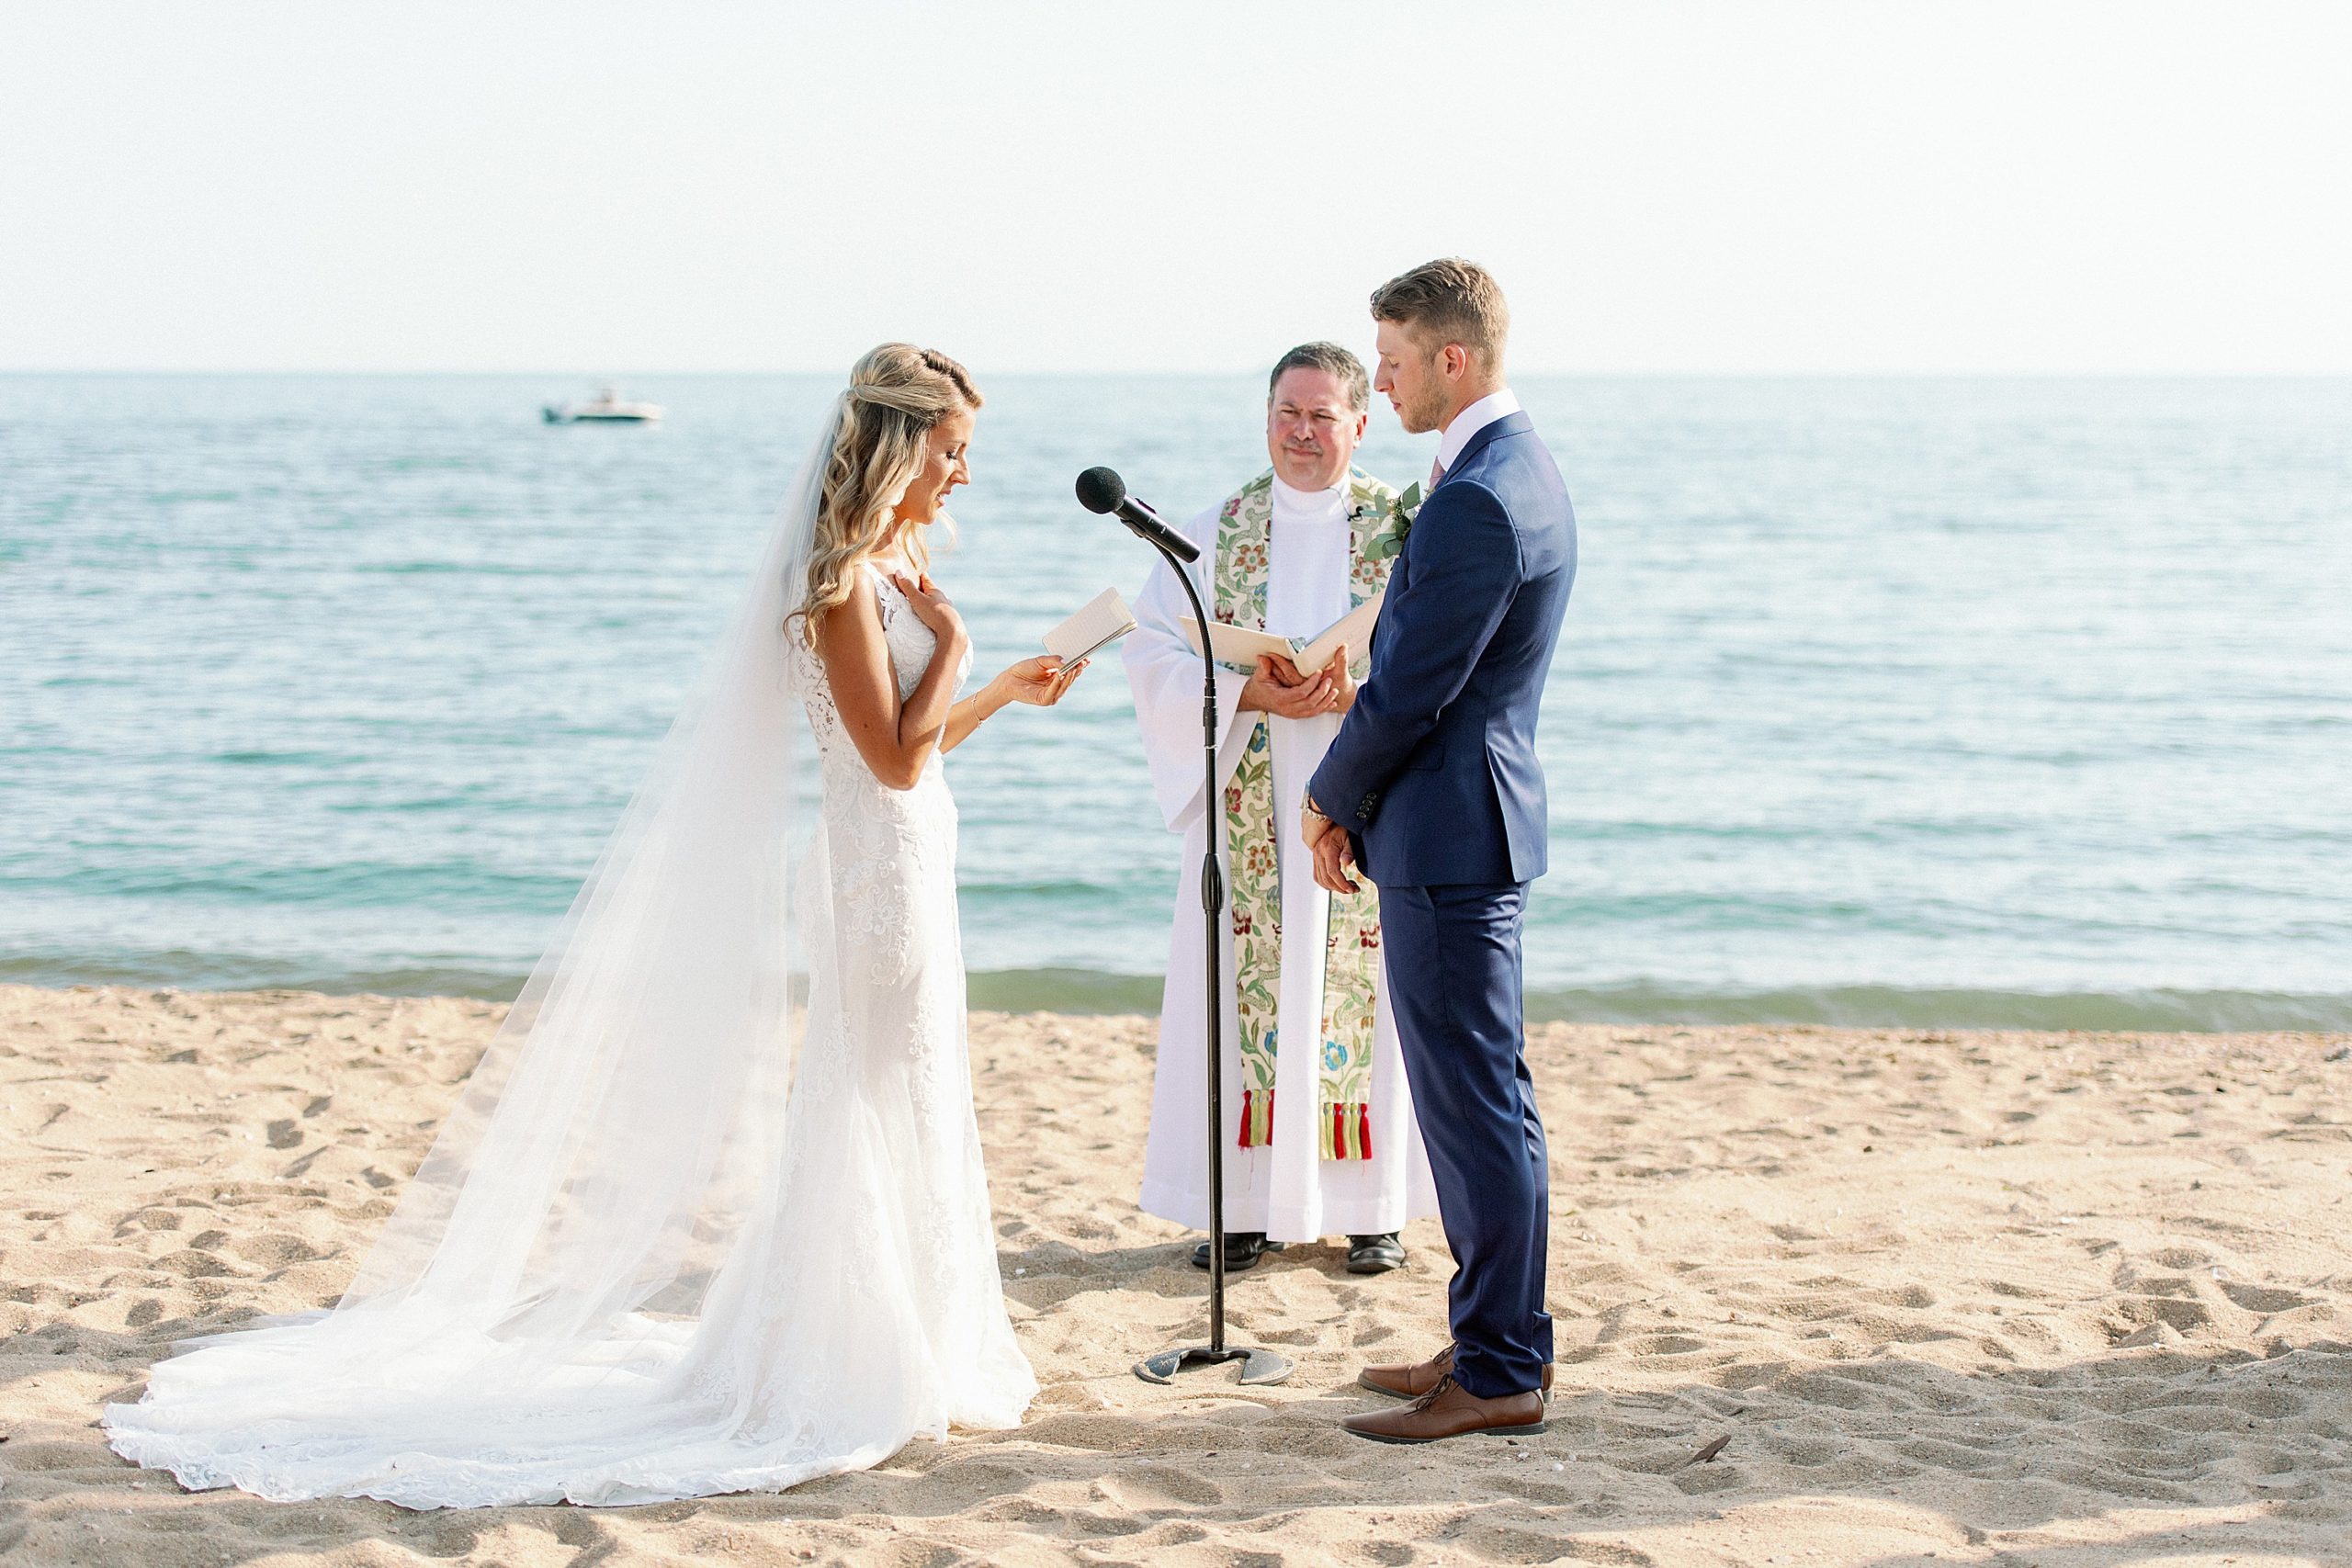 write your own vows to personalize your wedding